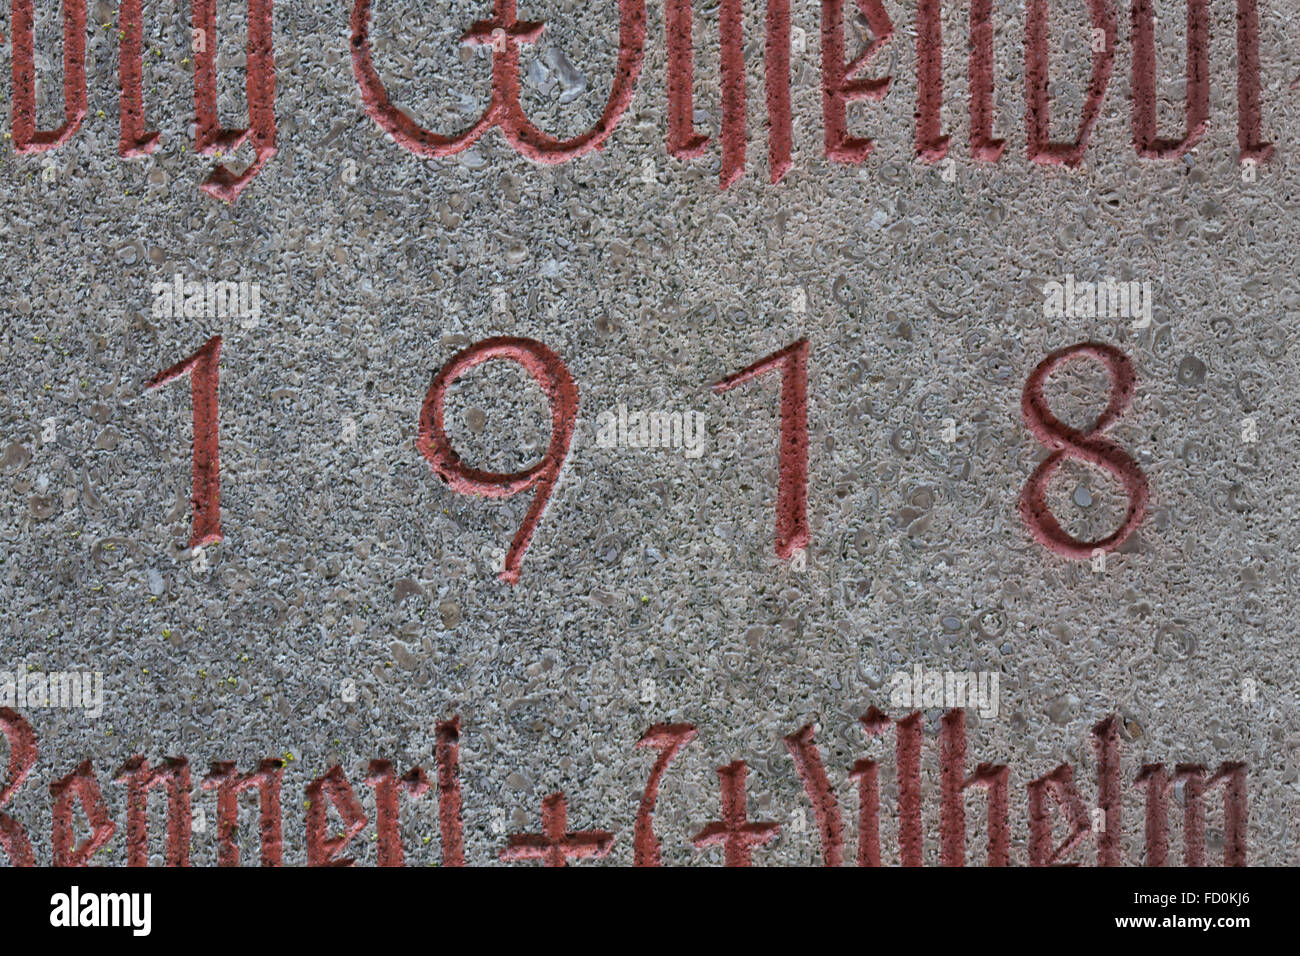 Year 1918 carved in stone. The years of World War I. Stock Photo